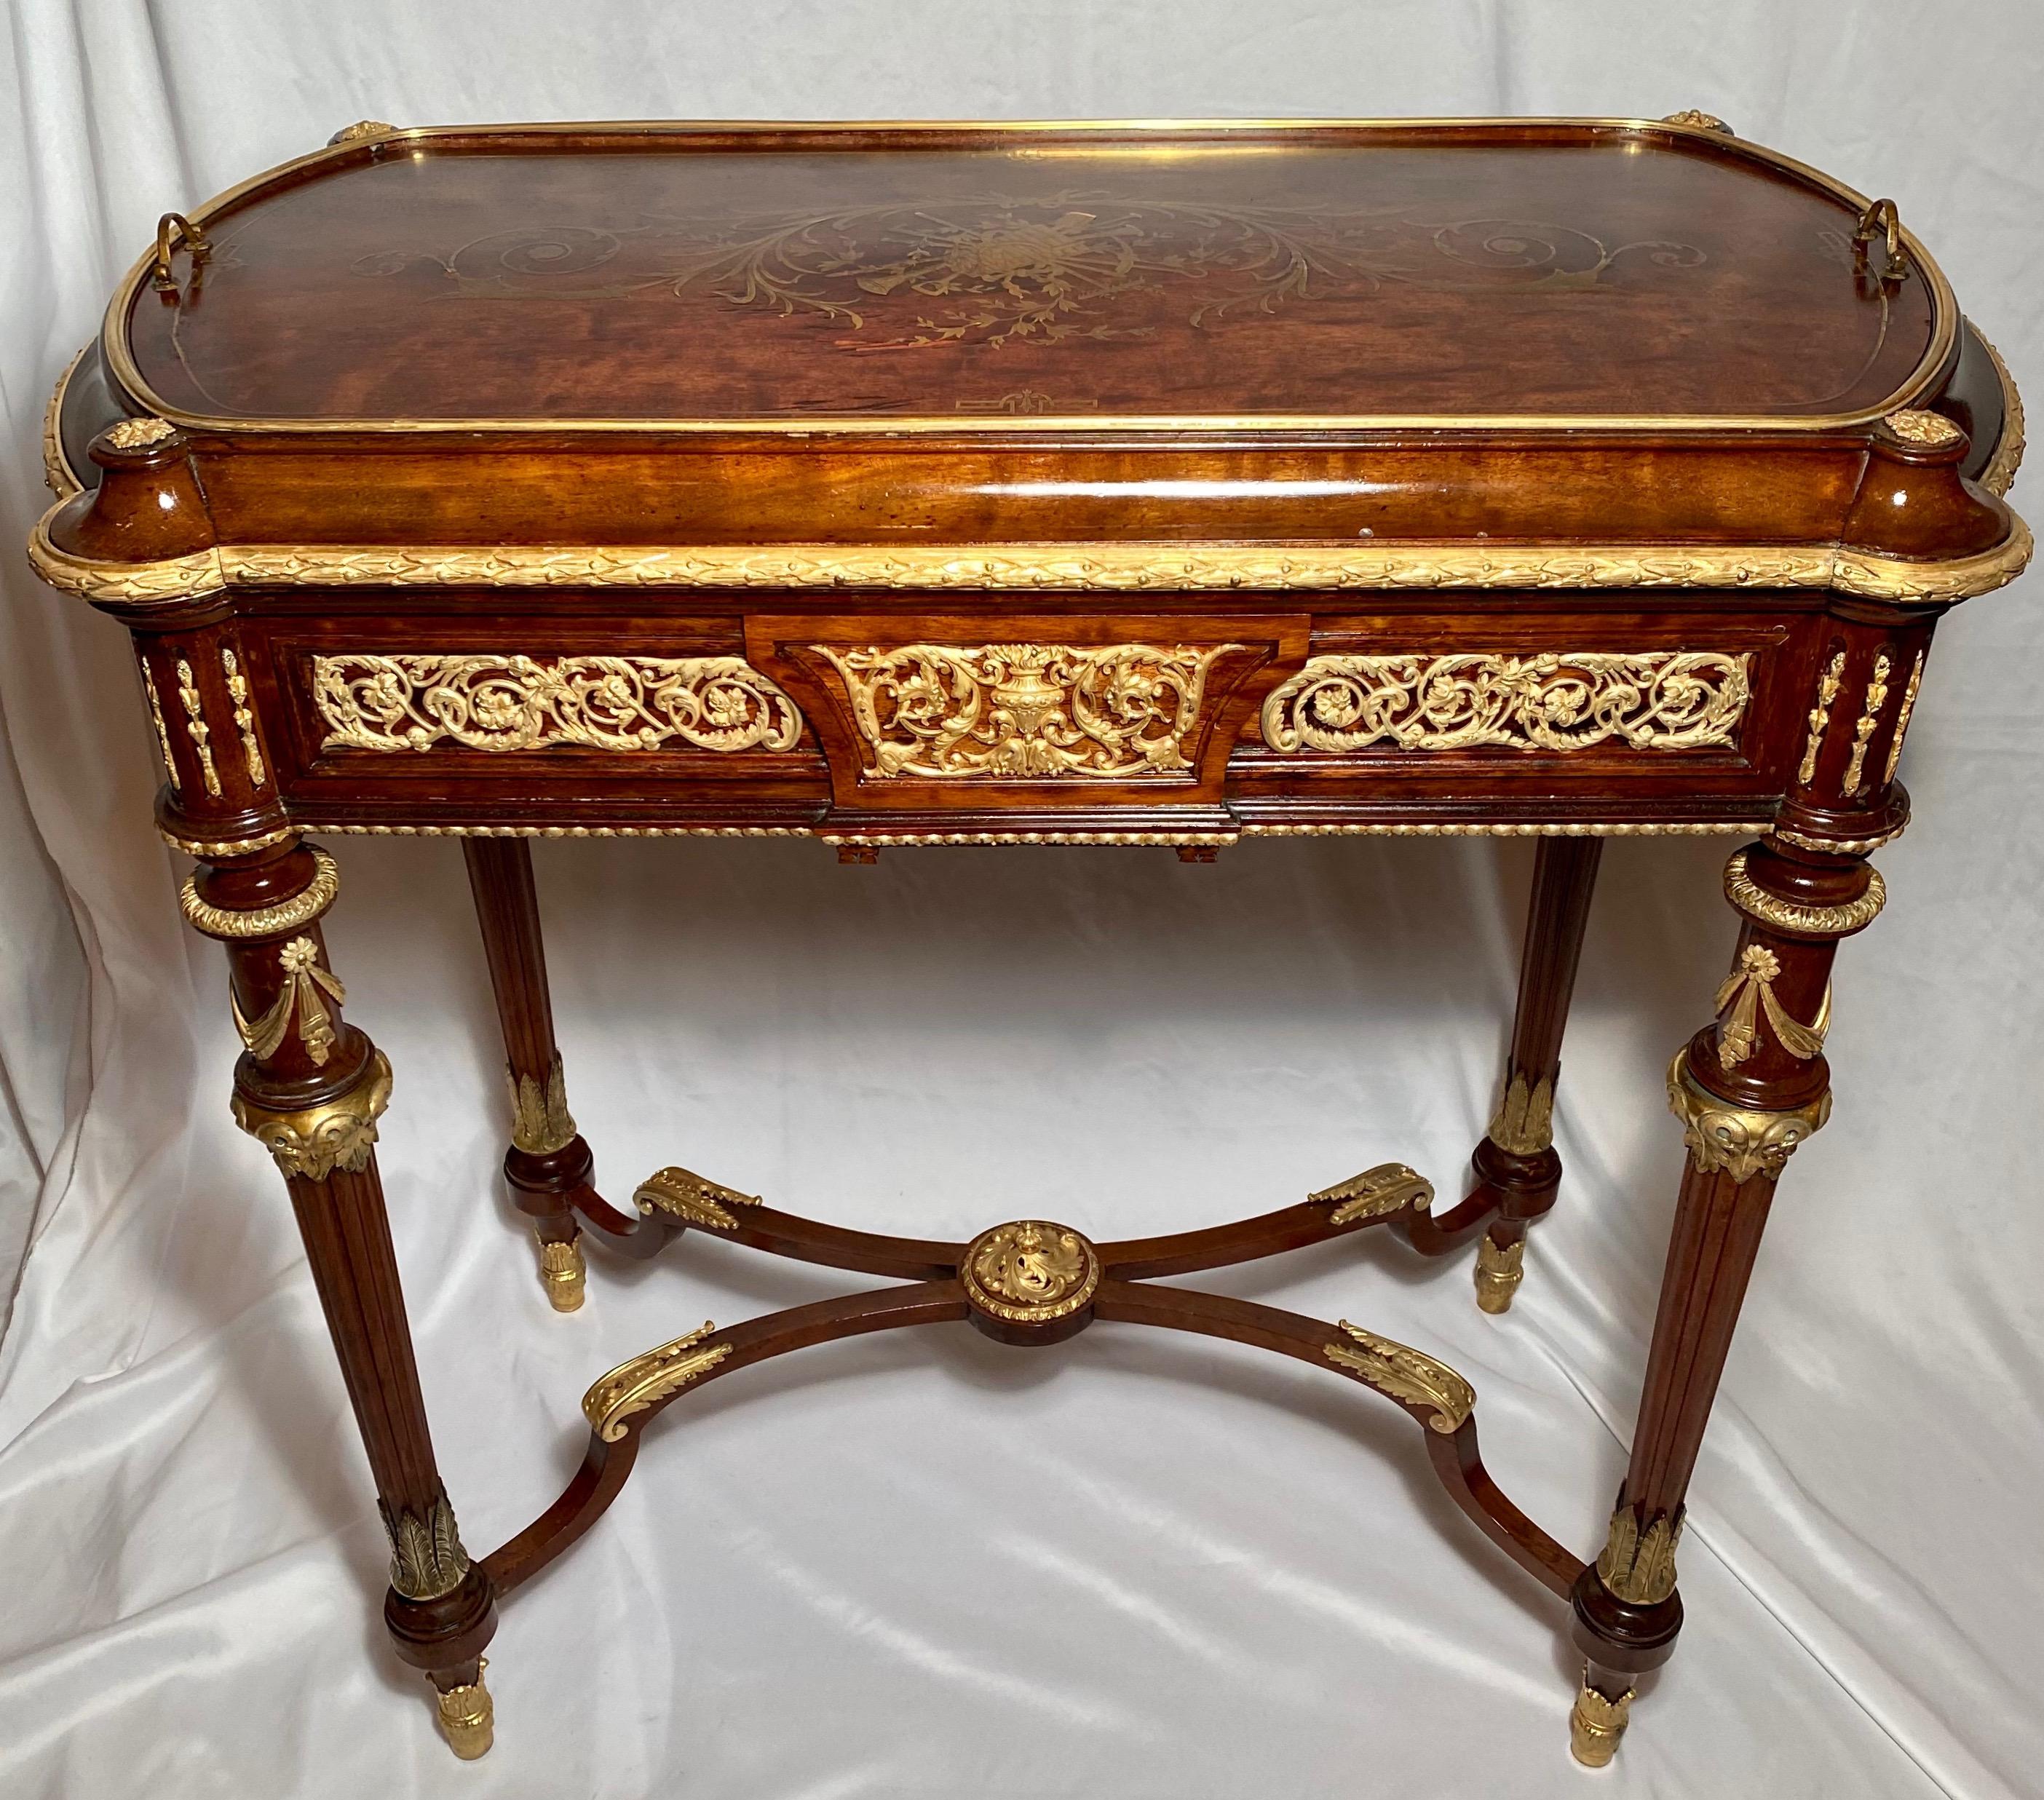 Antique French inlaid jardinière Napoleon III table circa 1885 with exotic wood inlay. A beautiful example of fine woodworking.

 